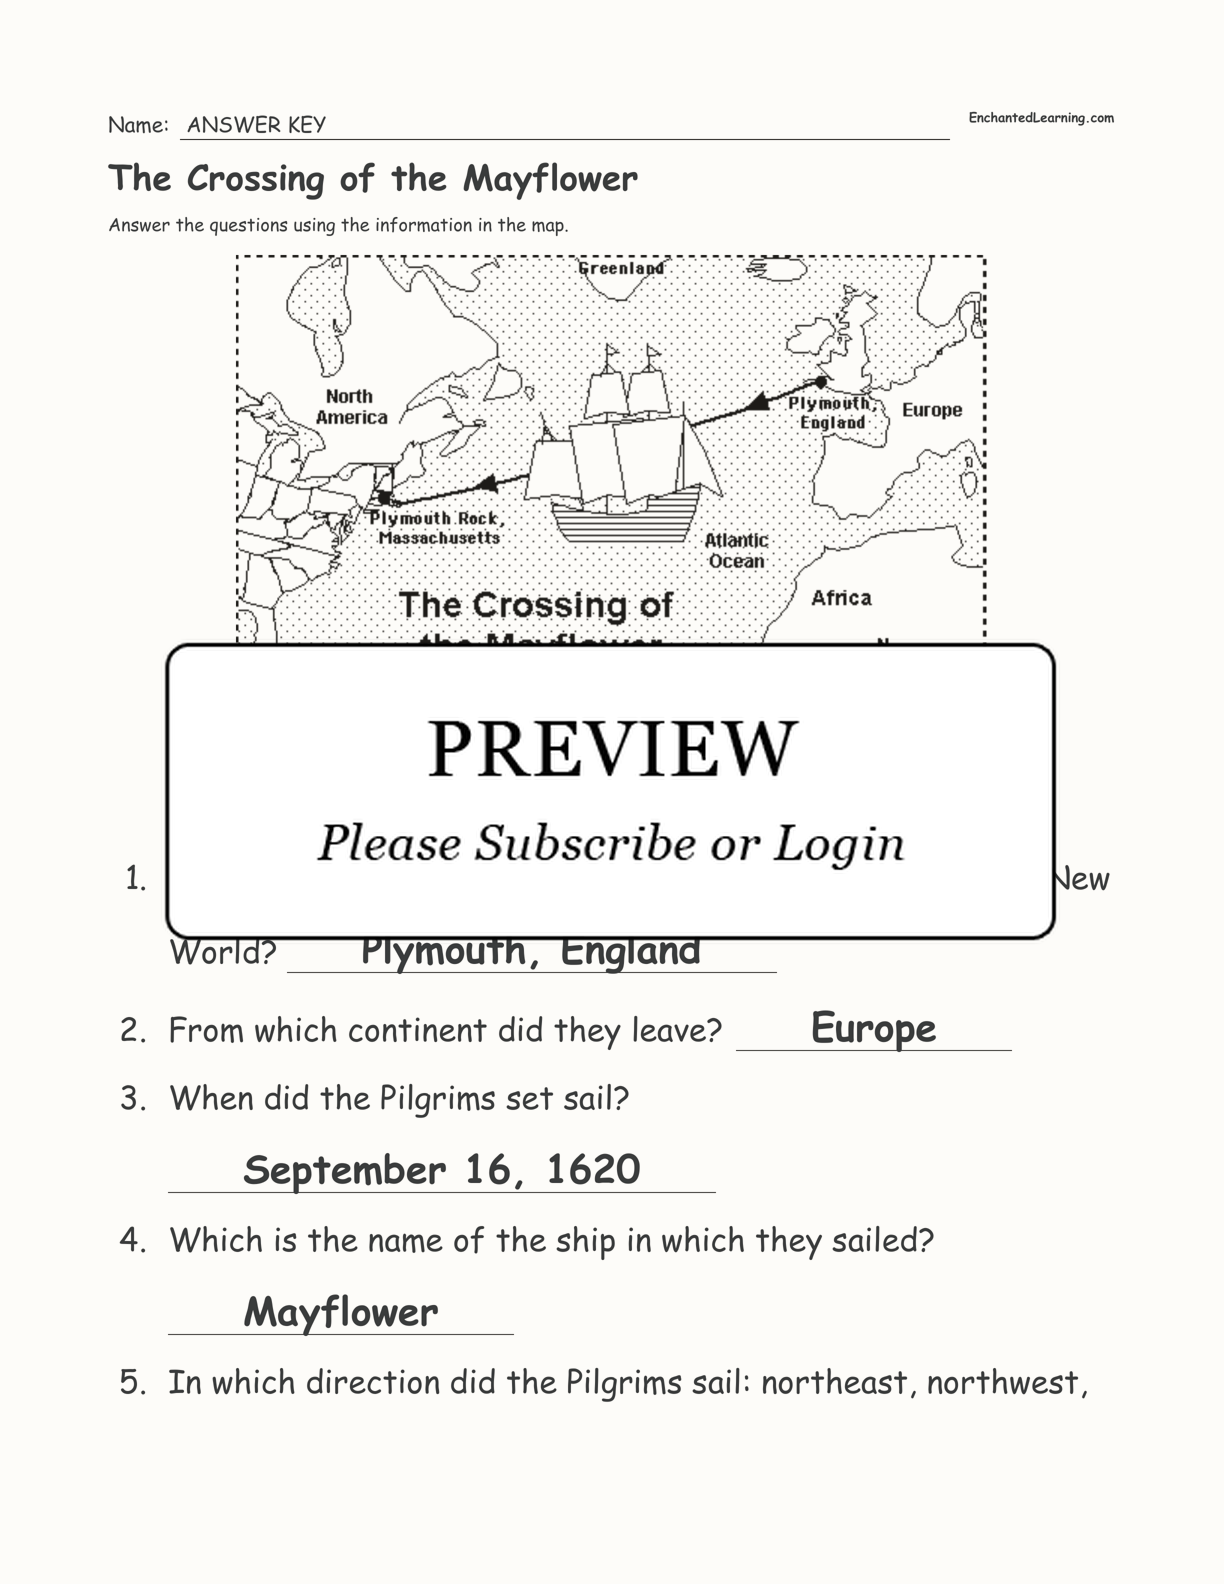 The Crossing of the Mayflower interactive worksheet page 3